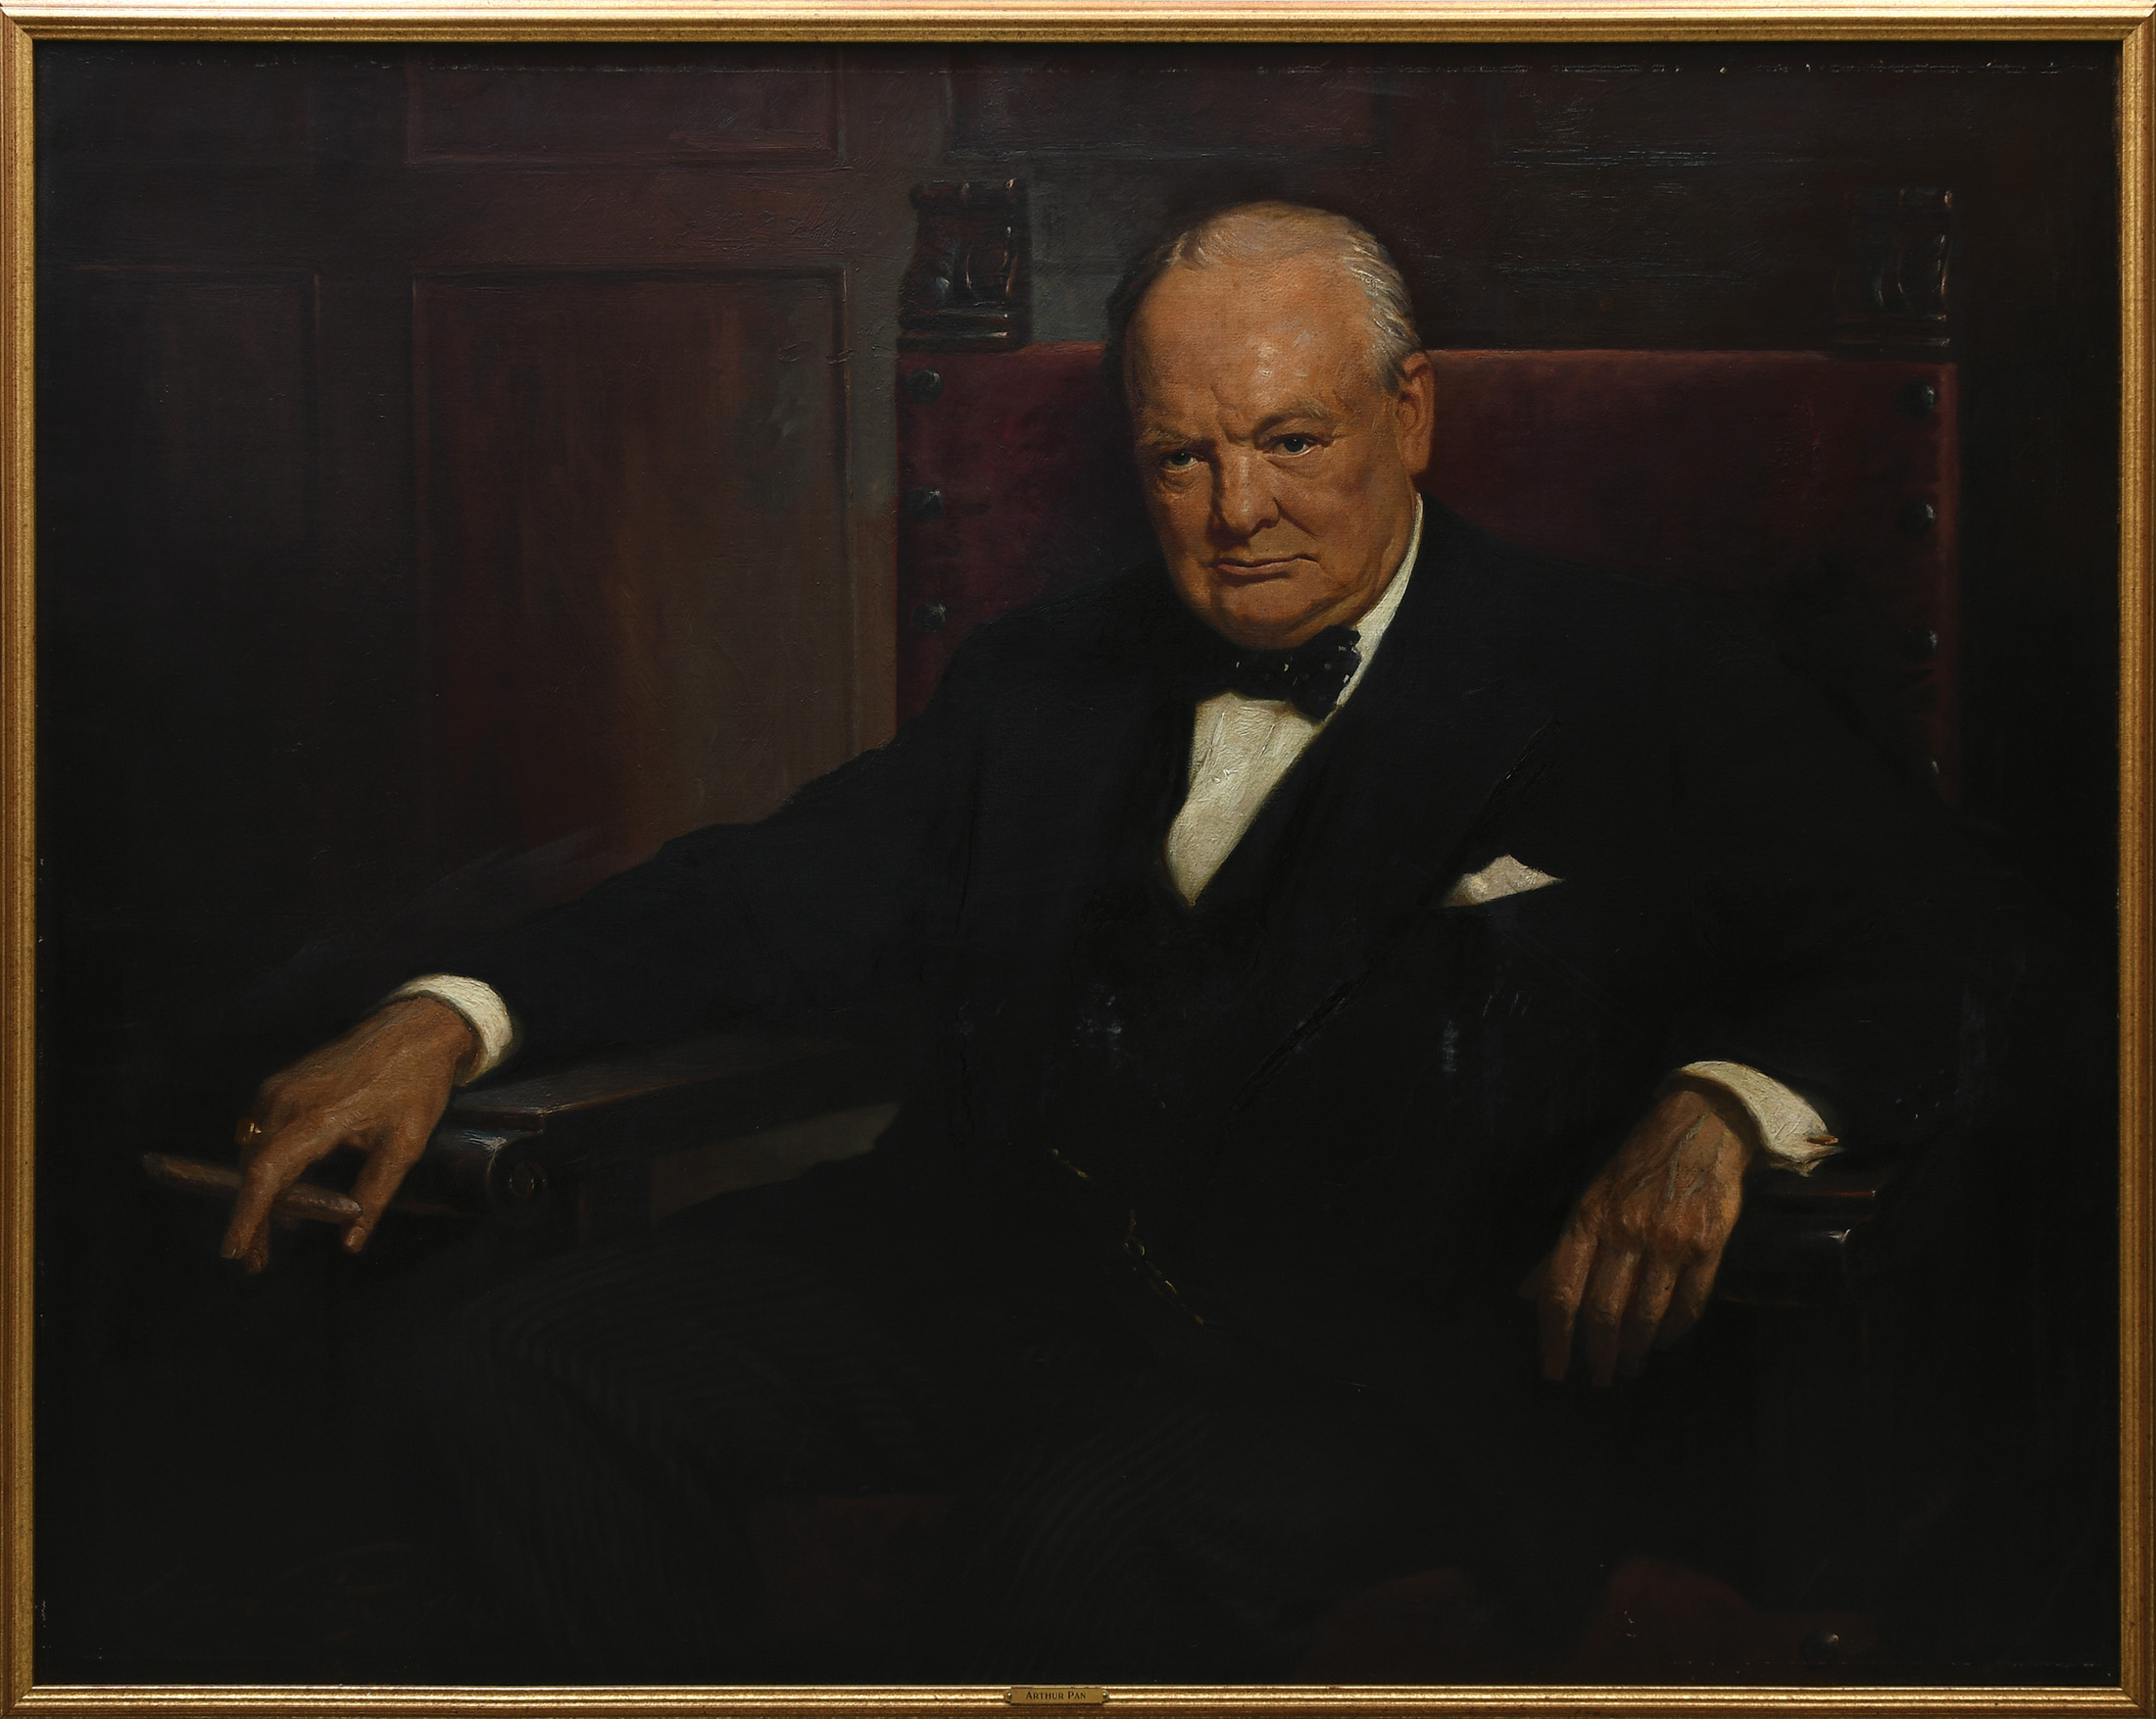 This large portrait of Churchill, by Arthur Pan, was reproduced in lithographs during World War II.